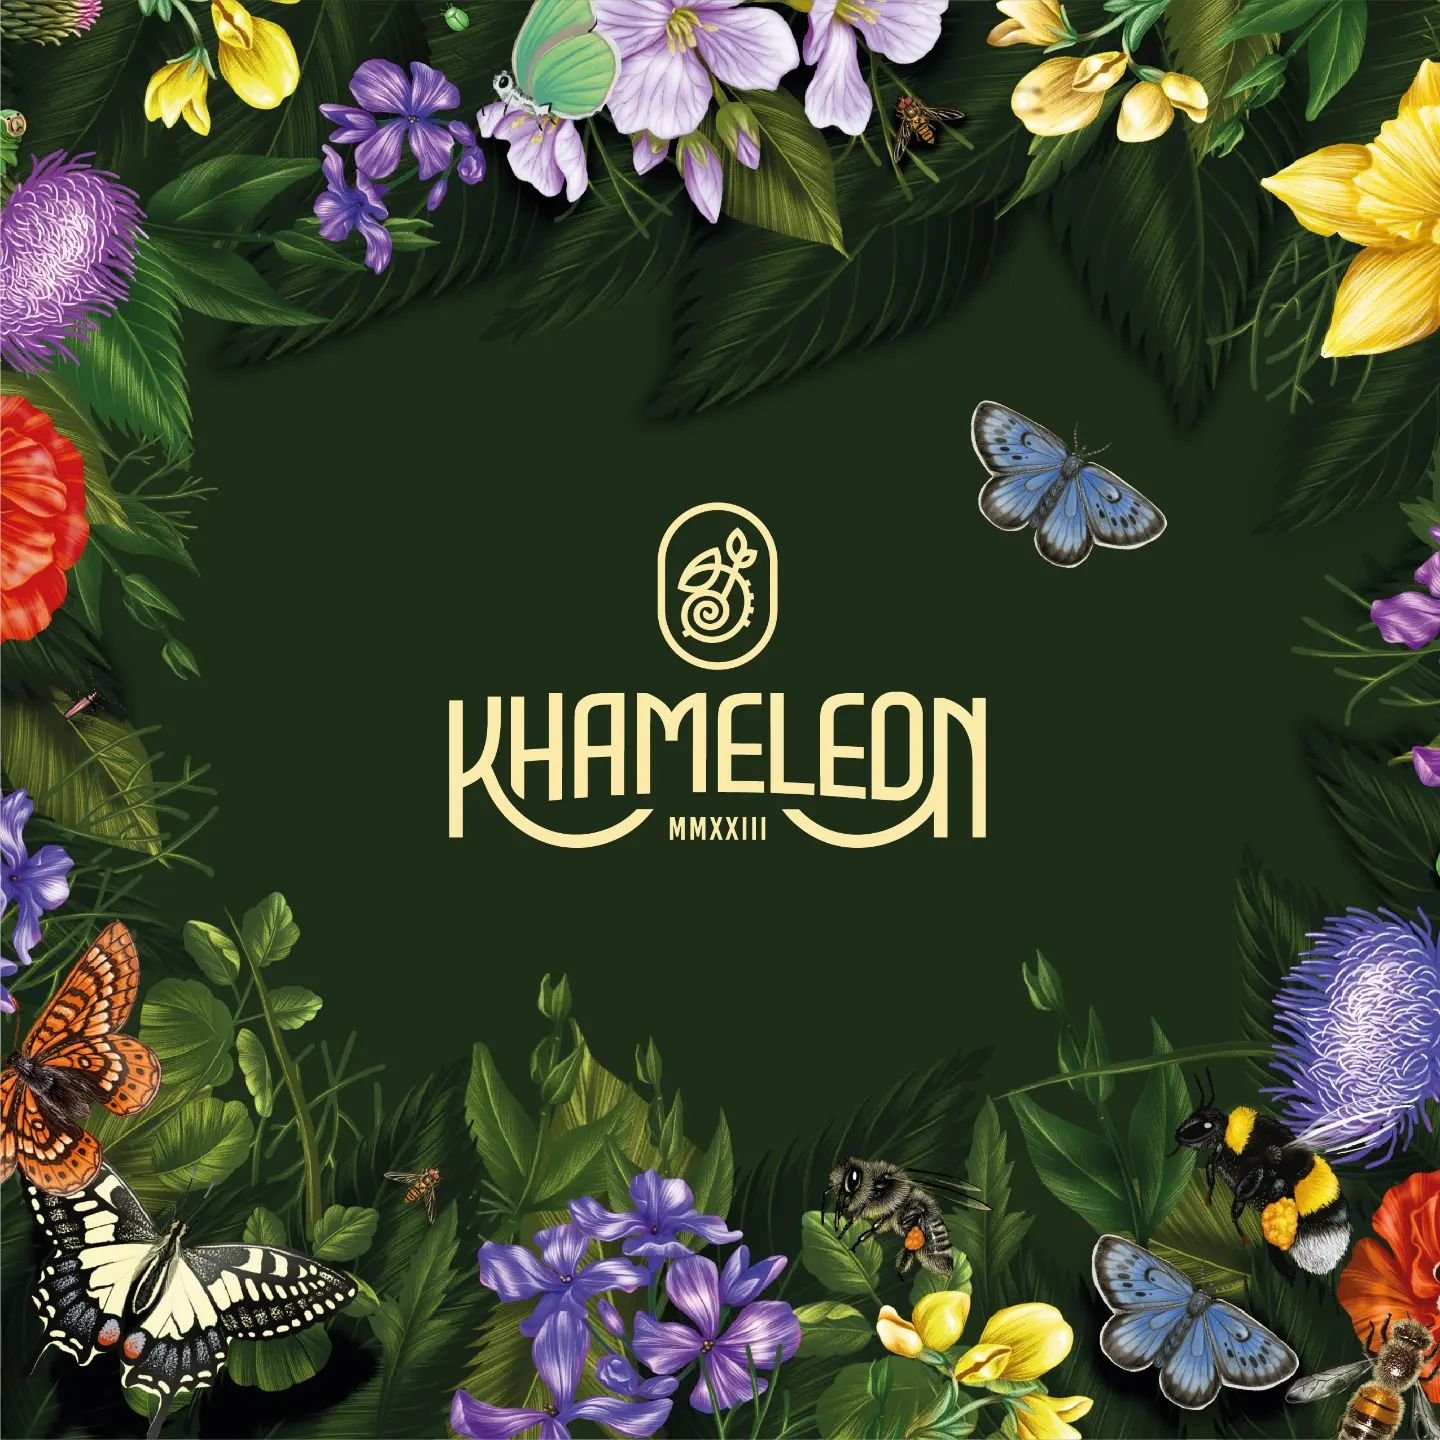 Khameleon offers best non-alcoholic options for popular beverages. The brand concept was developed around their environmental aspect and charities they support. A logo design is for that reason blending with nature. Suggested illustrations promote br